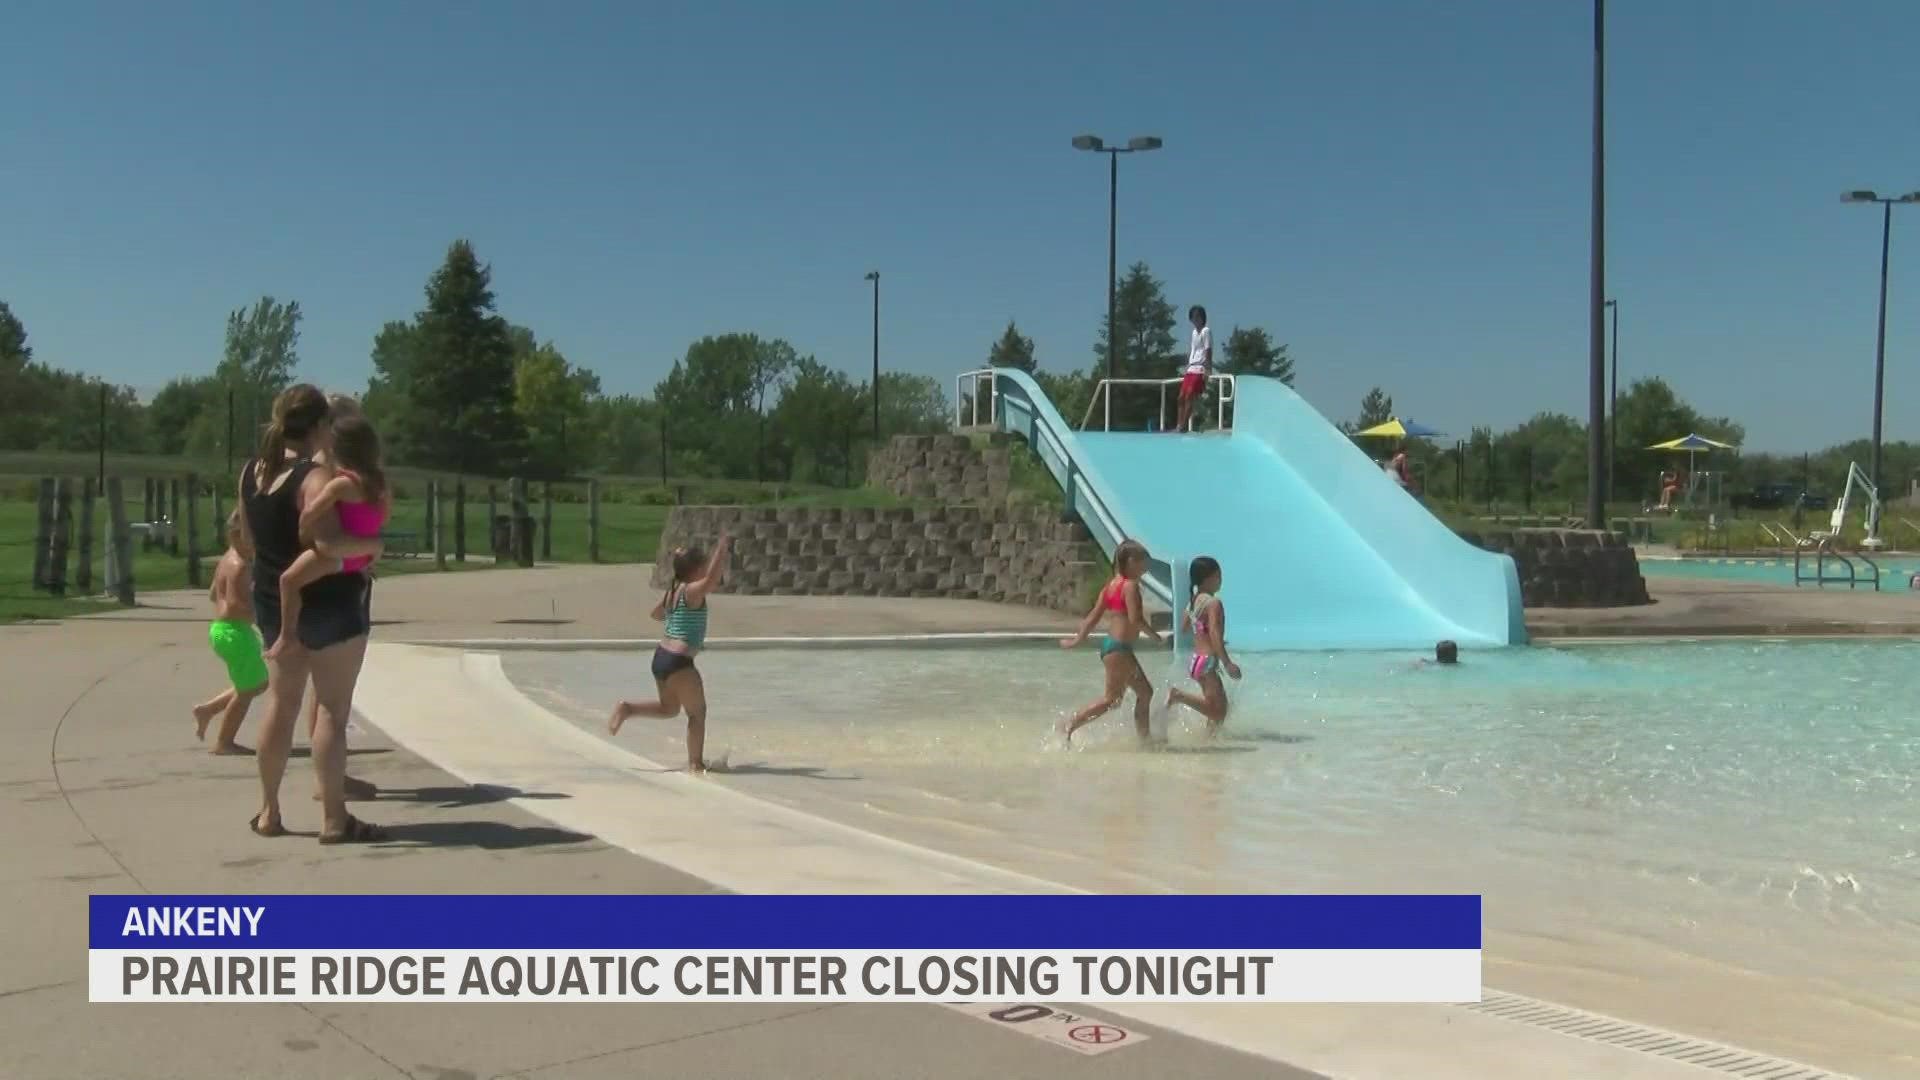 Sunday was the last day of the swim season at the for most Des Moines pools and the Prairie Ridge Aquatic Center in Ankeny.